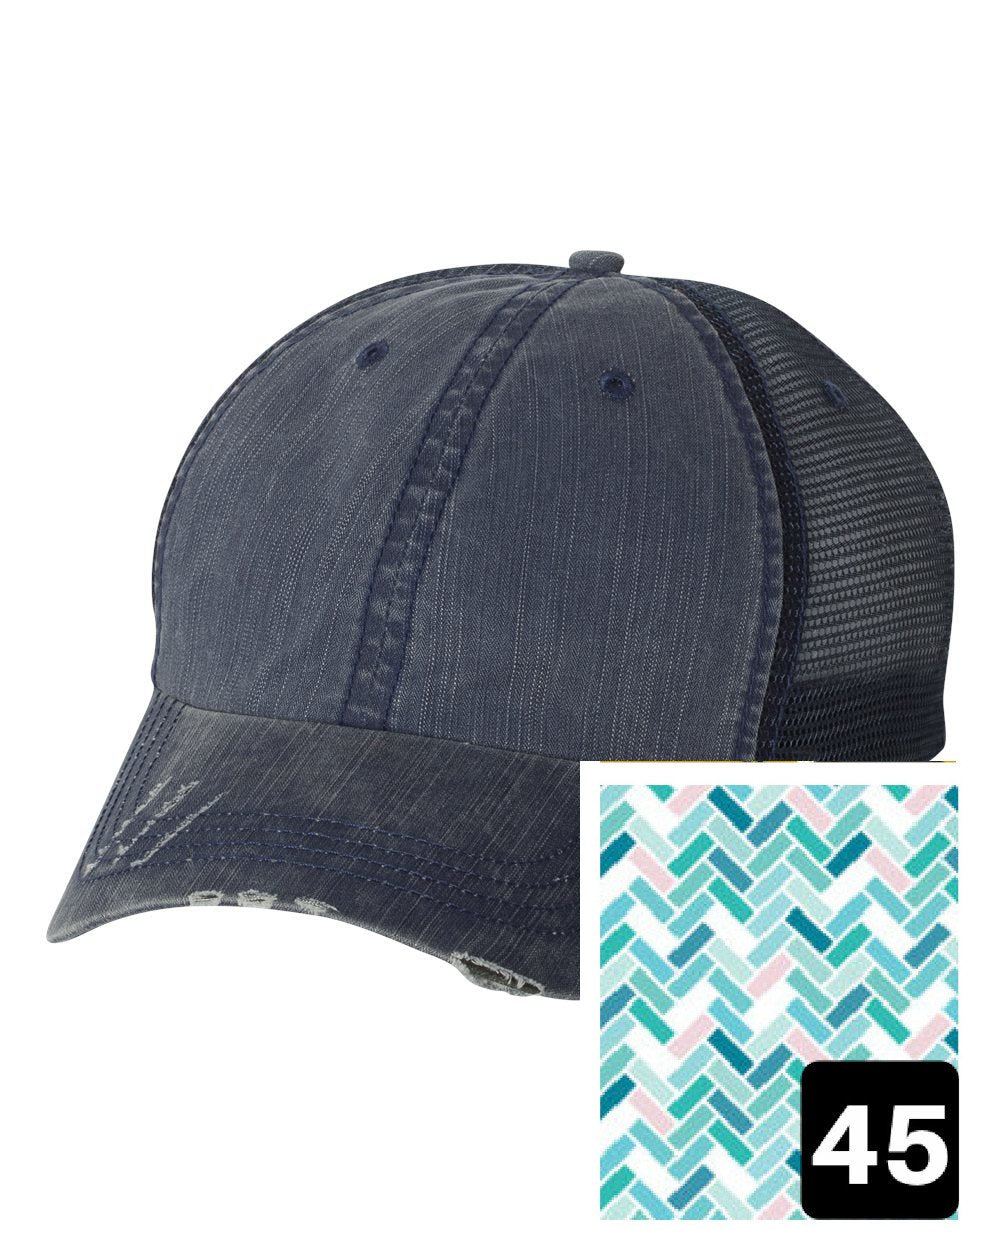 West Virginia Hat - Distressed Ponytail or Messy Bun Hat  - Many Fabric Choices